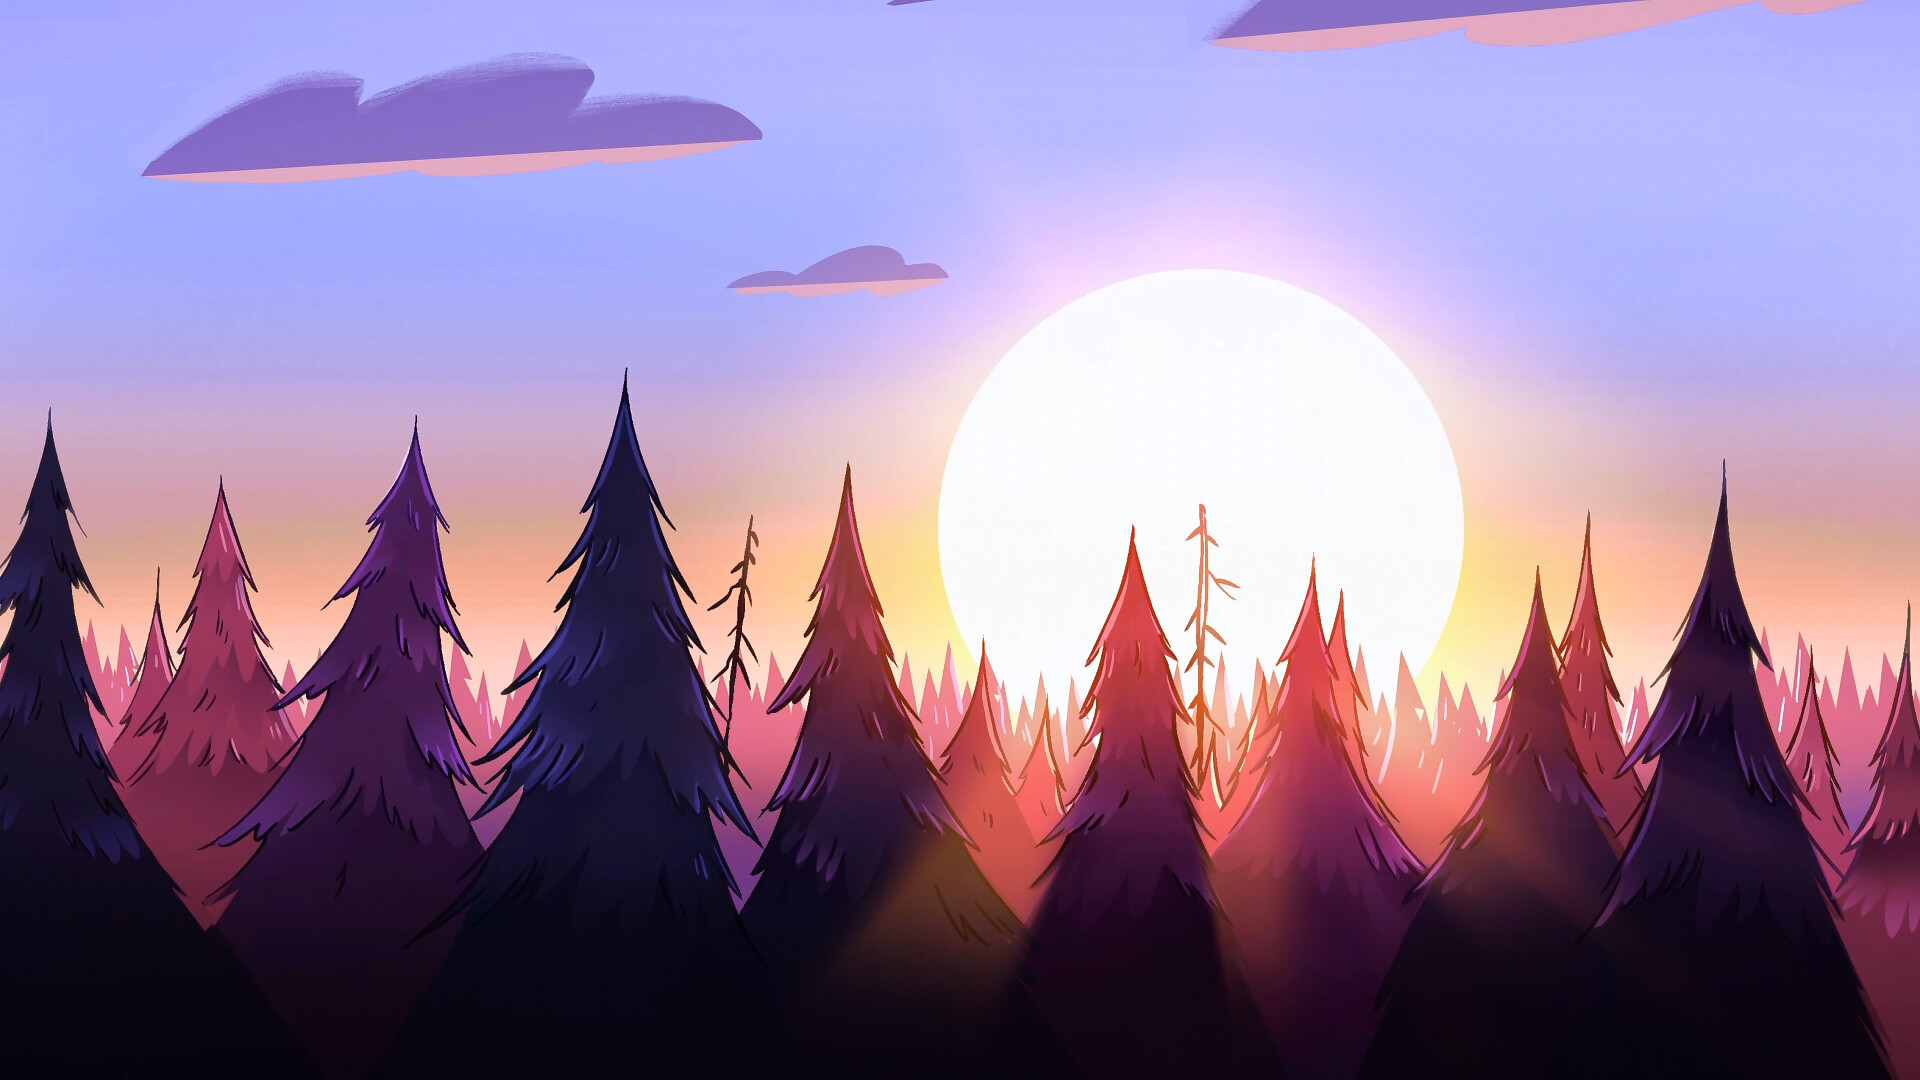 Gravity Falls: An American animated television series created by Alex Hirsch. 1920x1080 Full HD Background.